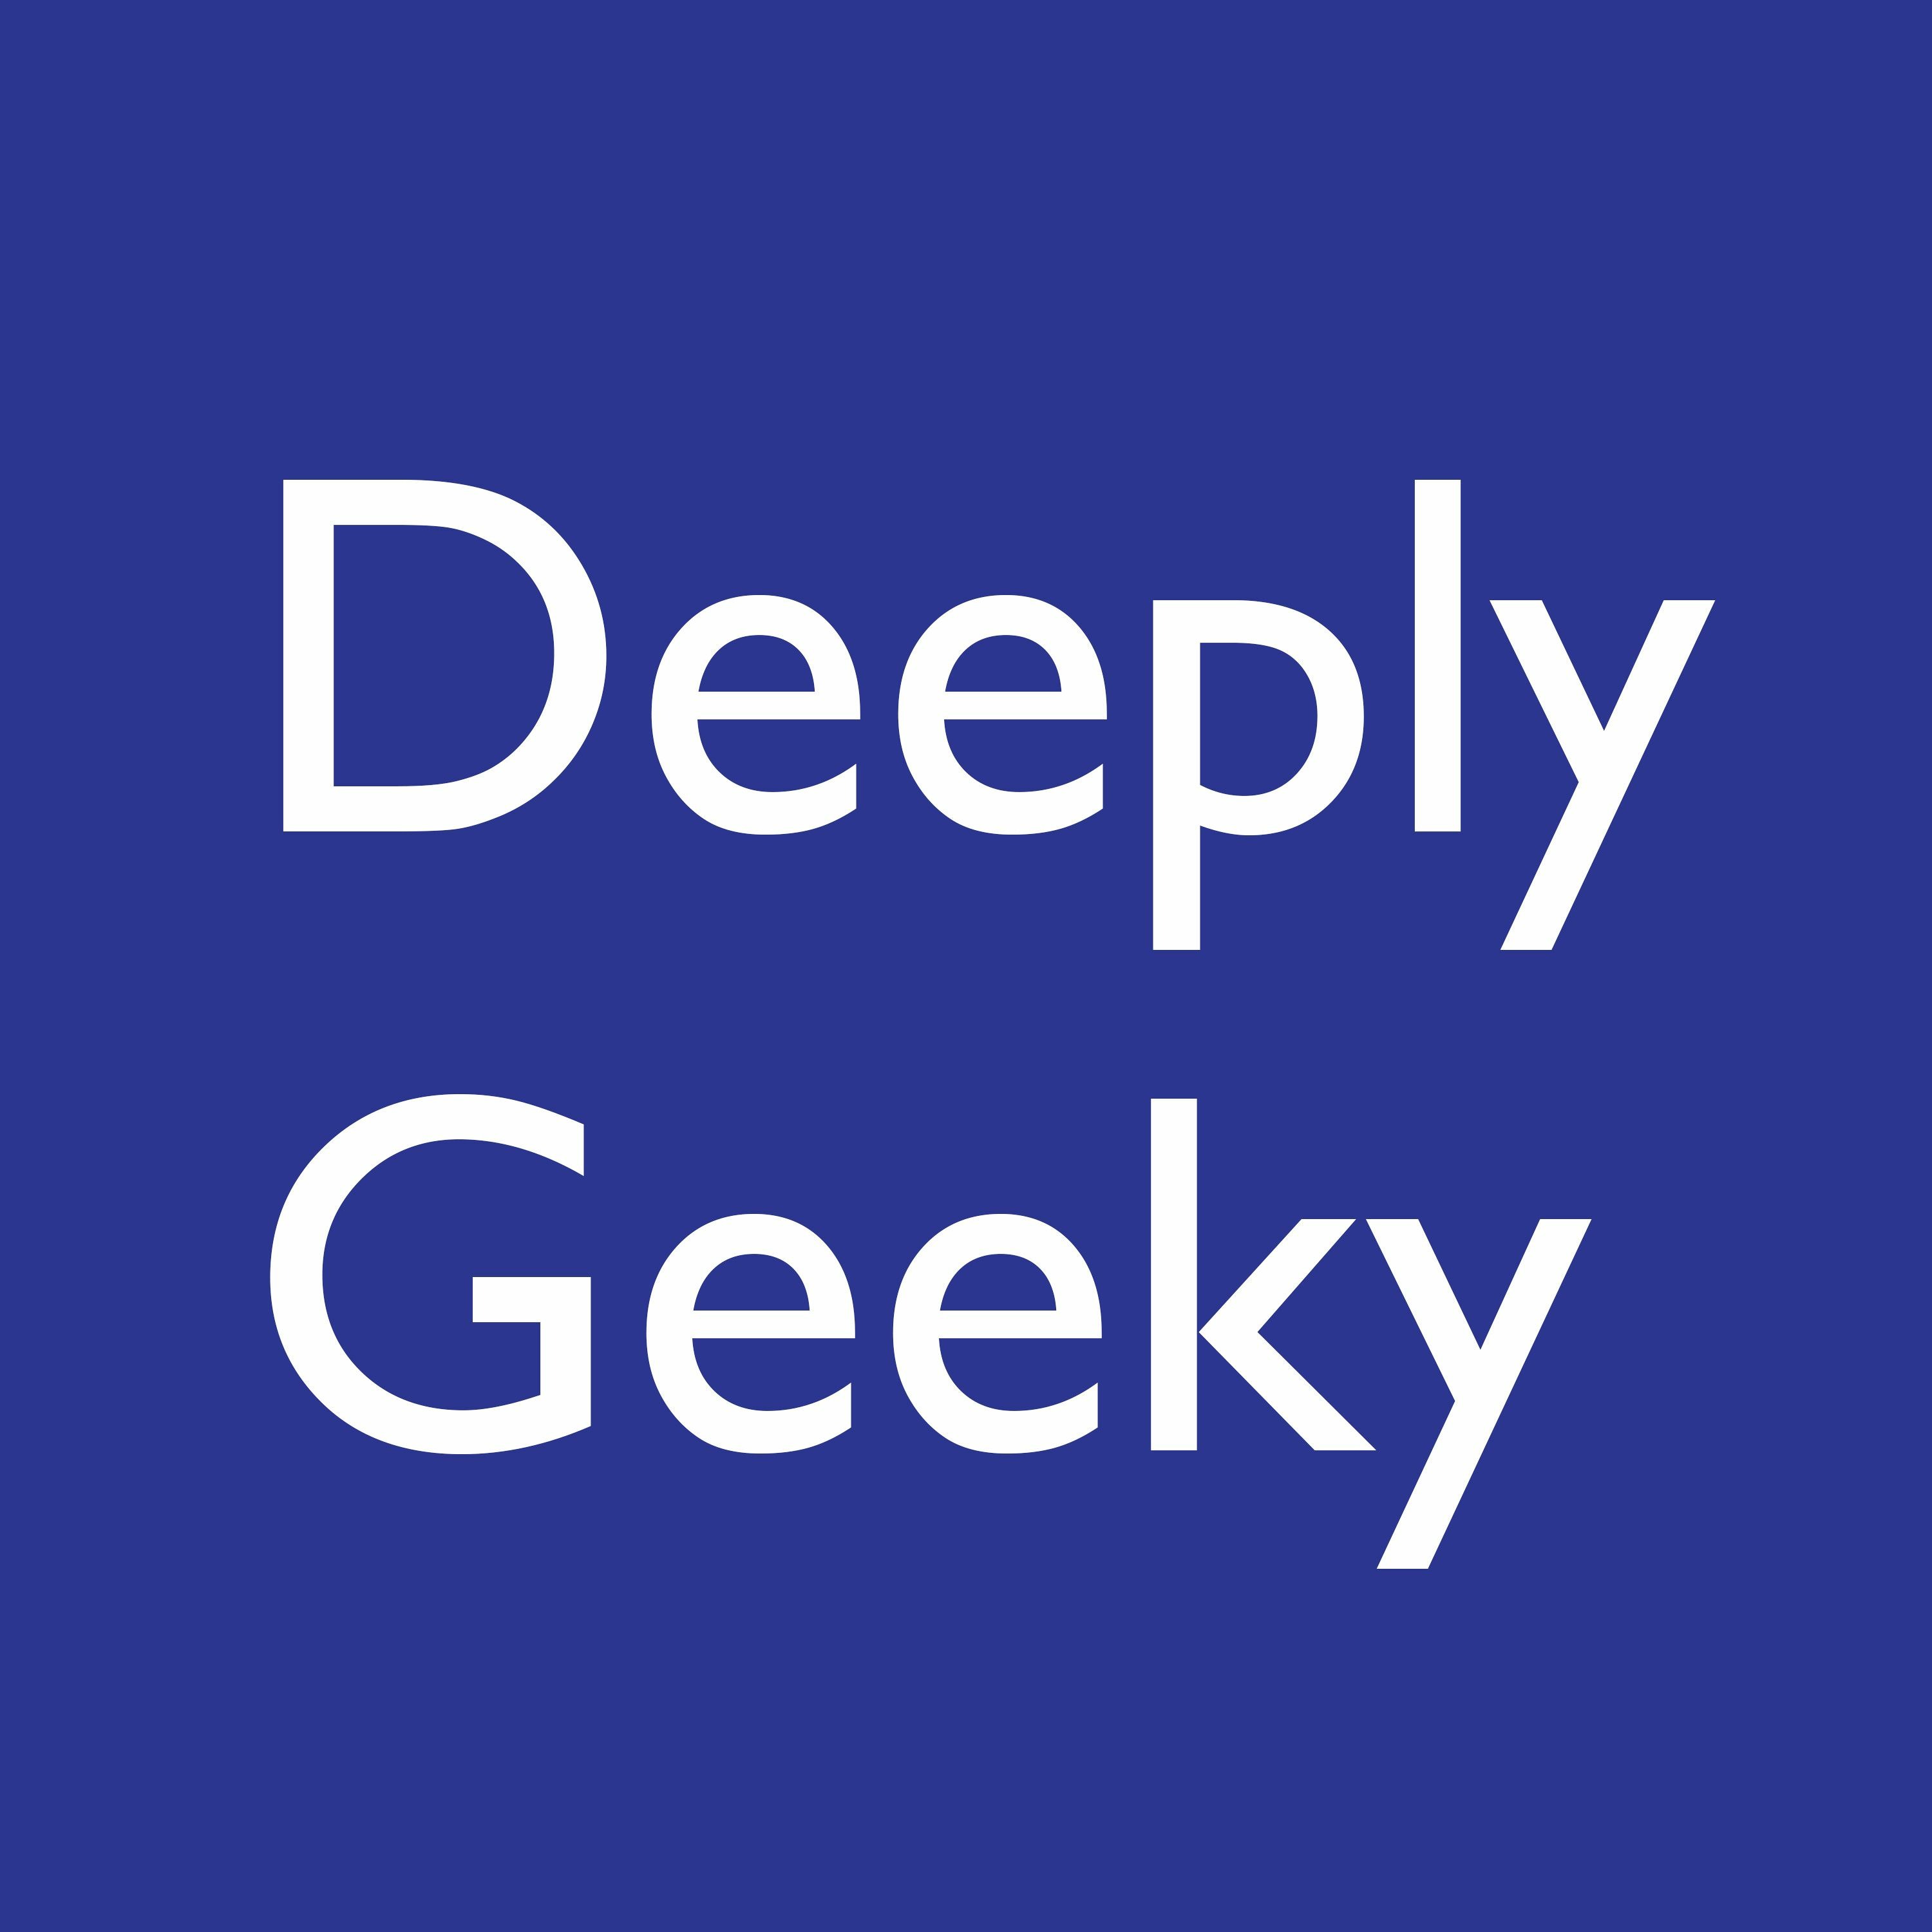 Harry Potter & Queer Subtext w/Andrew Sims of MuggleCast | Deeply Geeky Podcast Episode 1